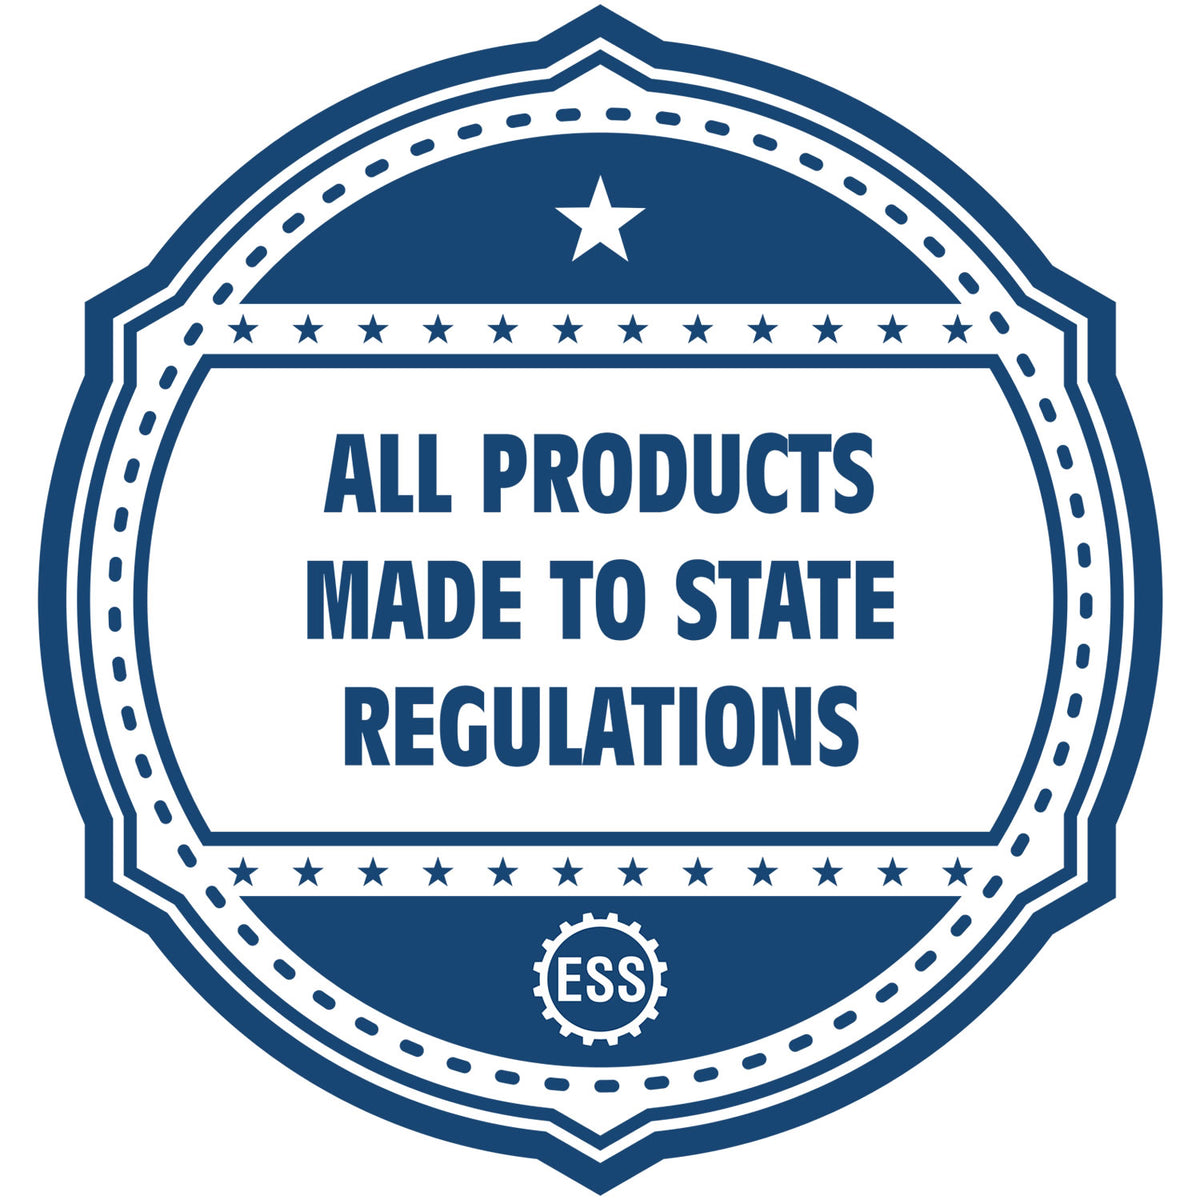 An icon or badge element for the Mississippi Engineer Desk Seal showing that this product is made in compliance with state regulations.